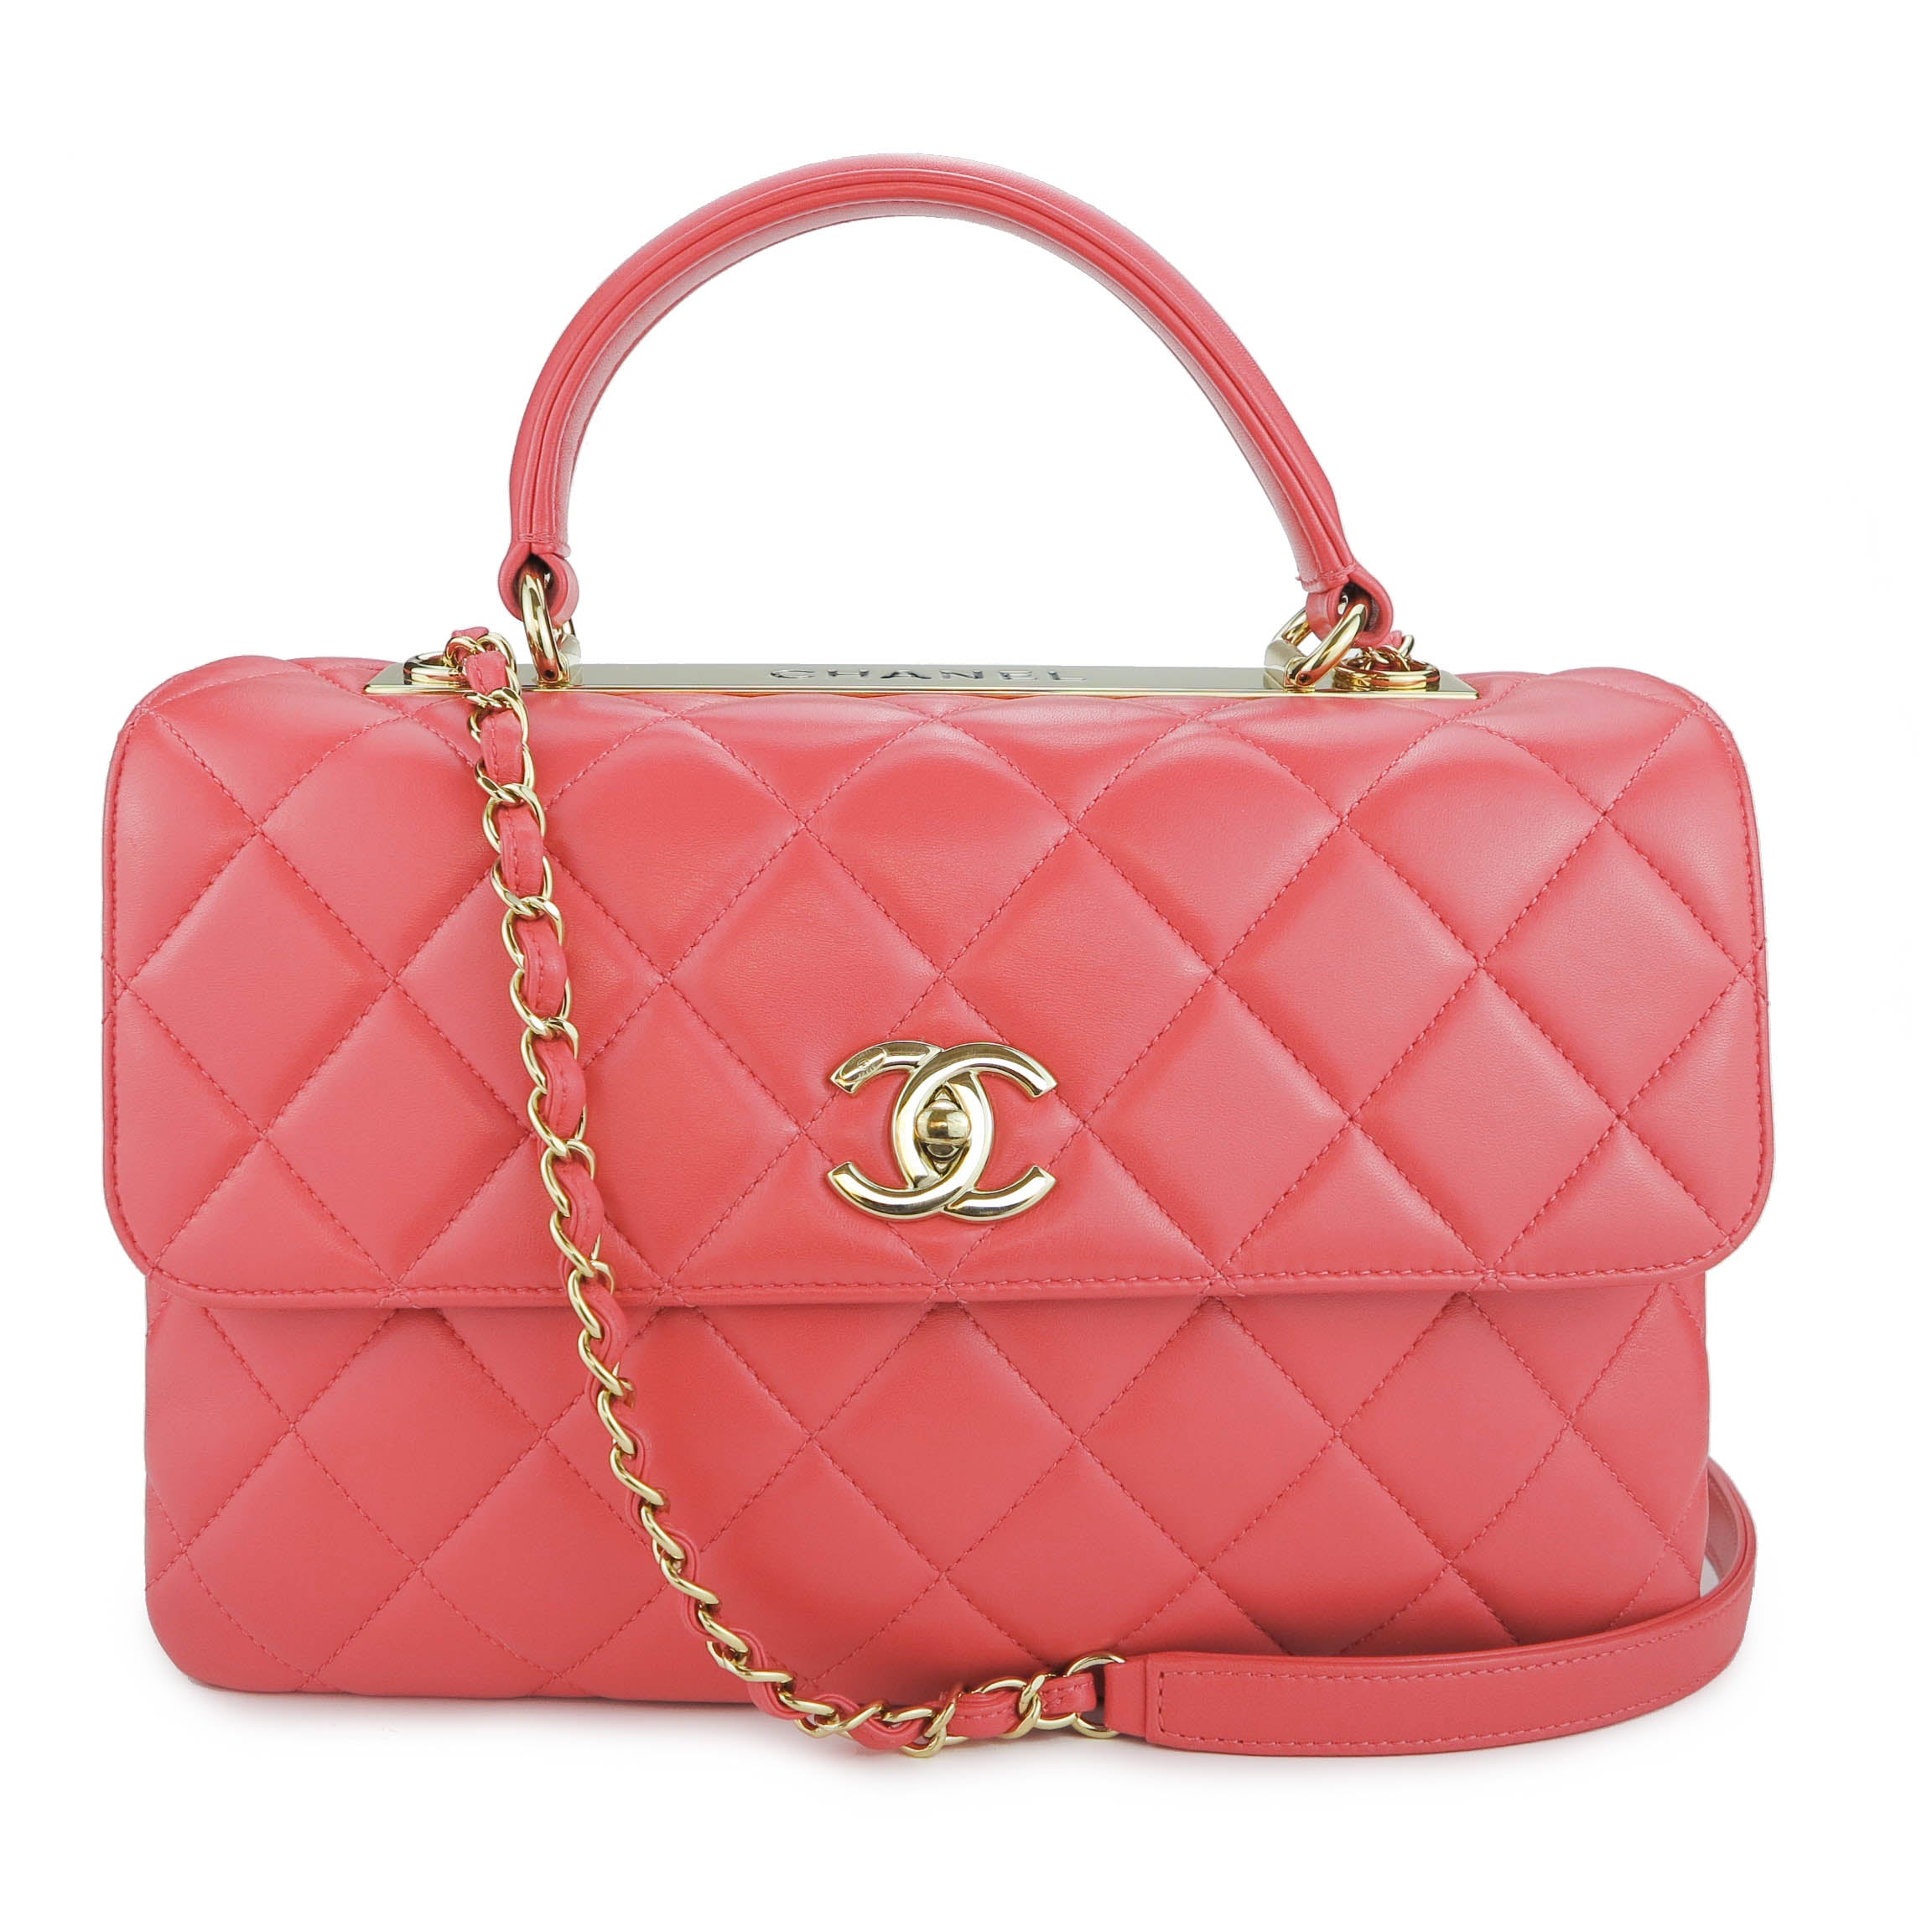 Chanel Chevron Small Trendy CC Flap Bag With Top Handle A92236 Rose Pink  2018(Gold-tone Hardware) #guccibags